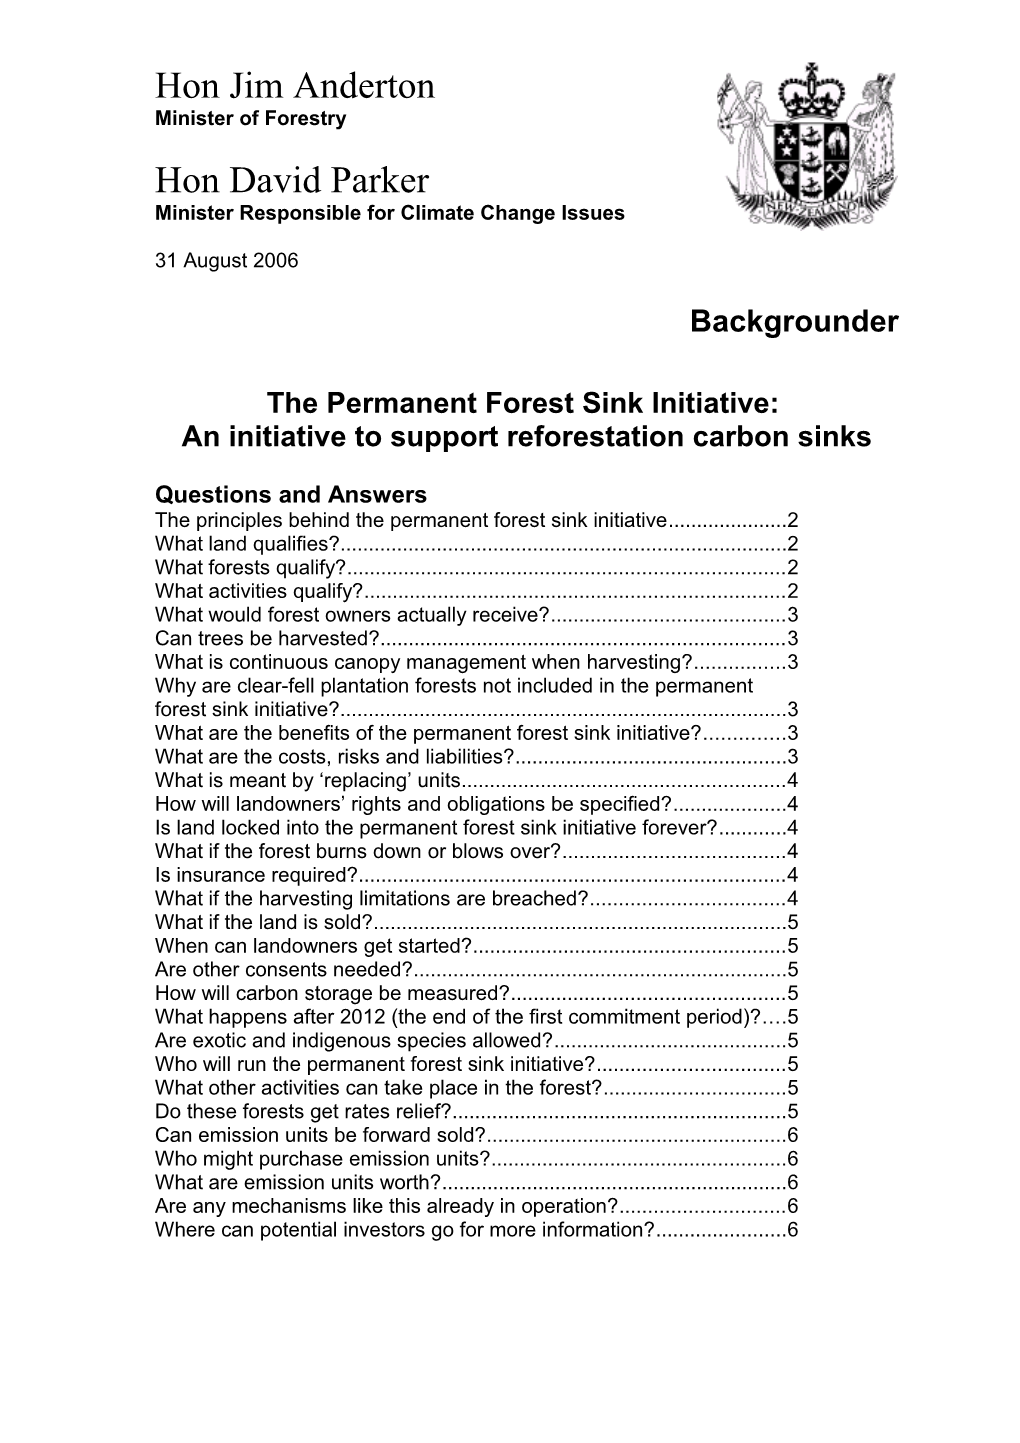 The Permanent Forest Sink Initiative: An Initiative To Support Reforestation Carbon Sinks